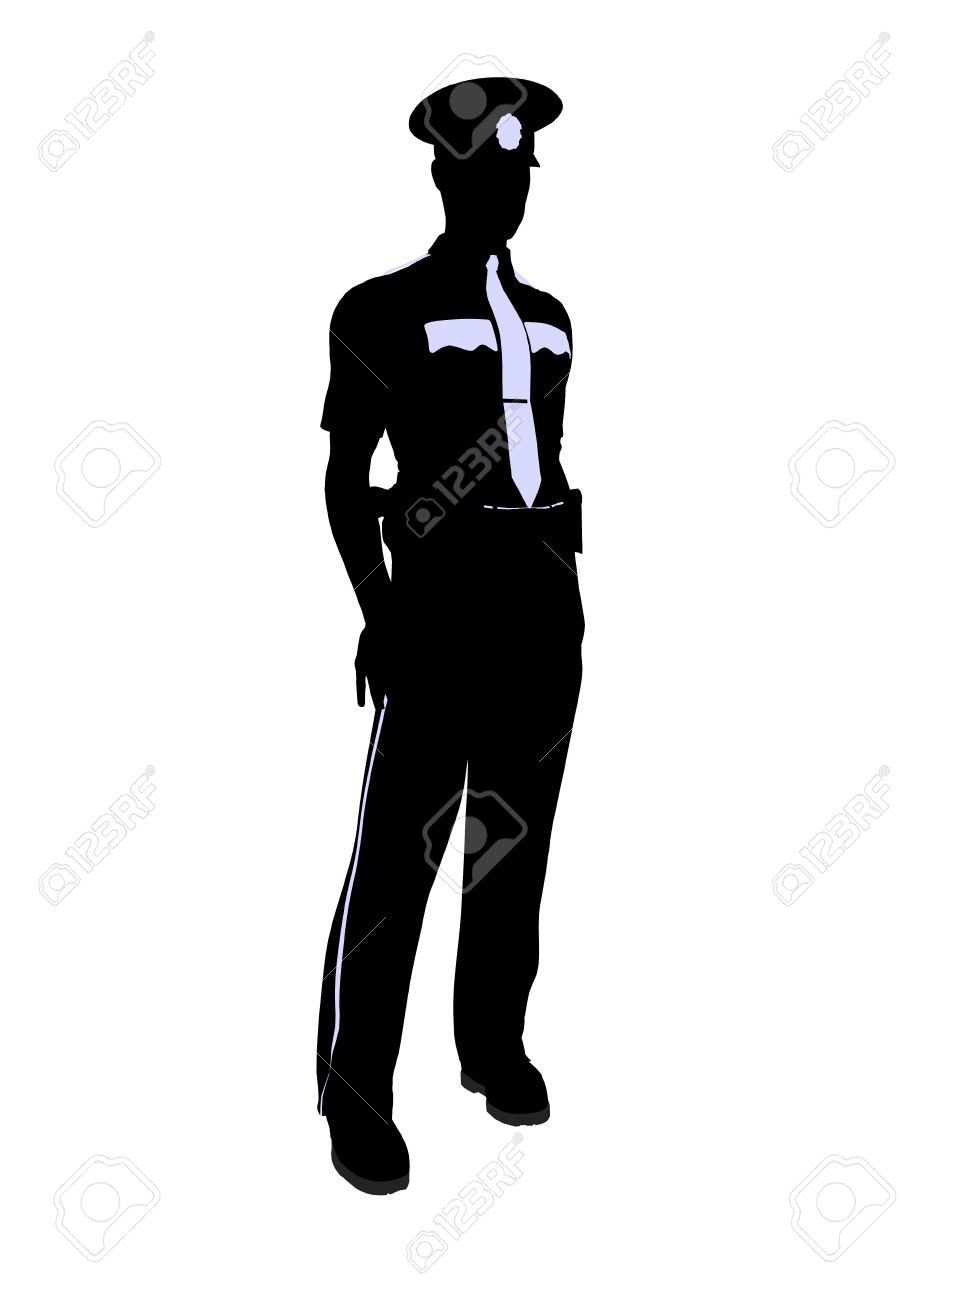 policeman clipart silhouette